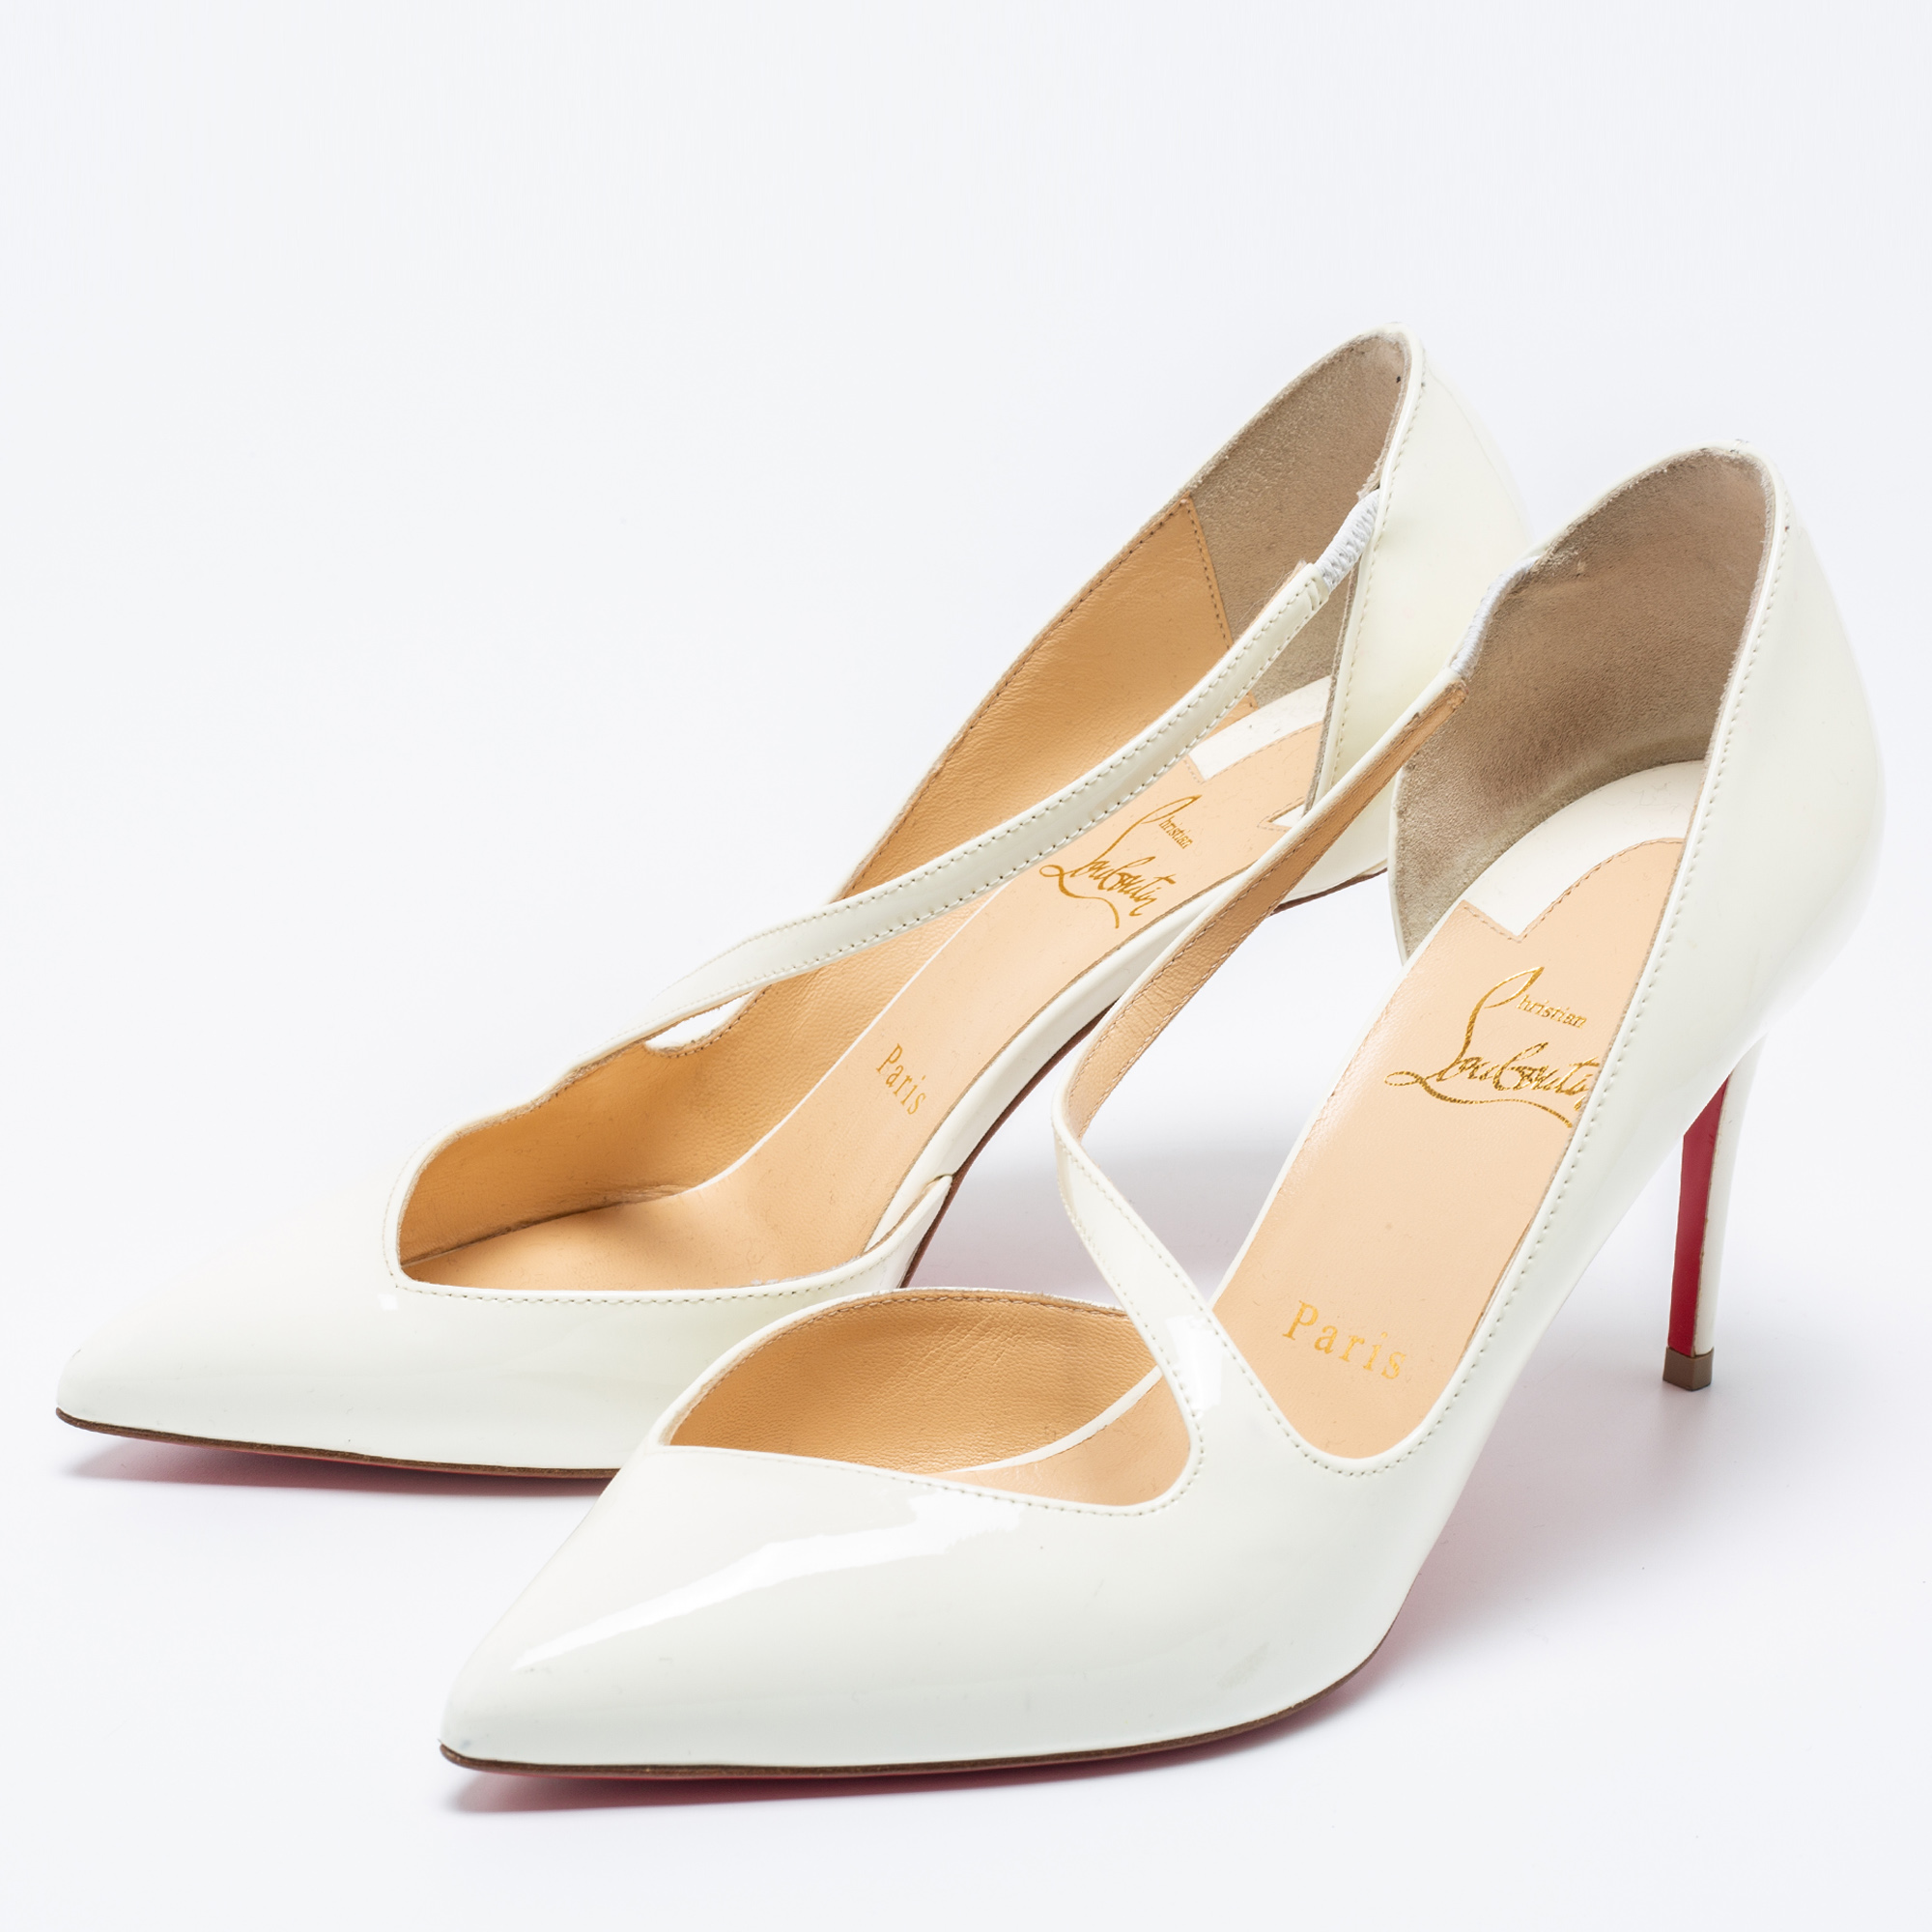 

Christian Louboutin Off-White Patent Leather Jumping D'orsay Pumps Size